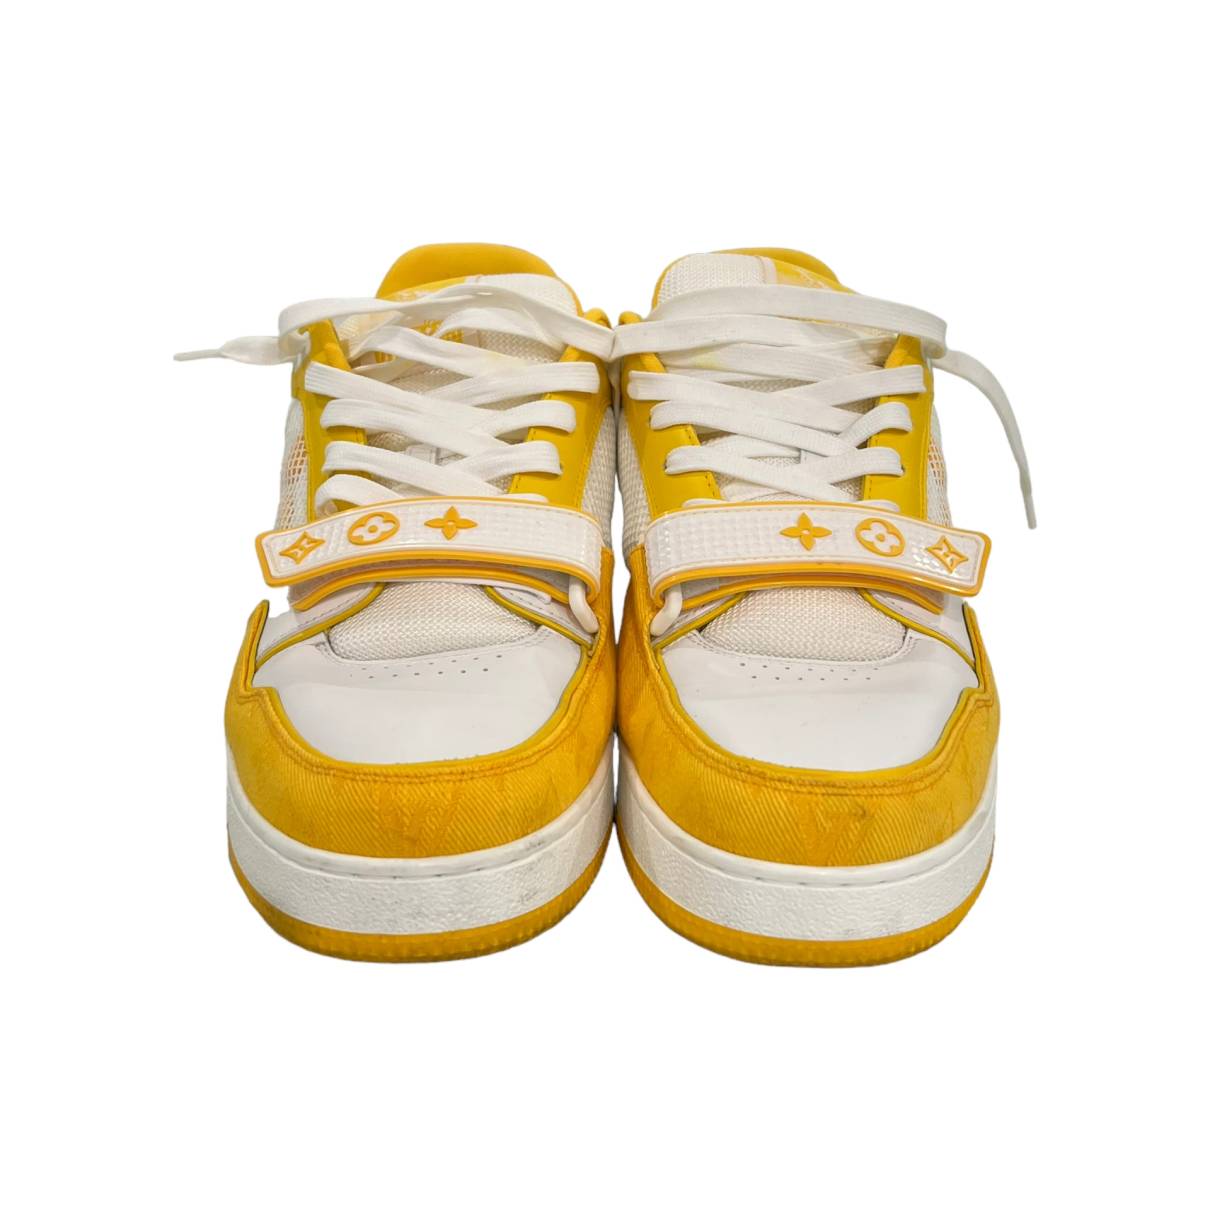 Lv trainer leather low trainers Louis Vuitton Yellow size 9 UK in